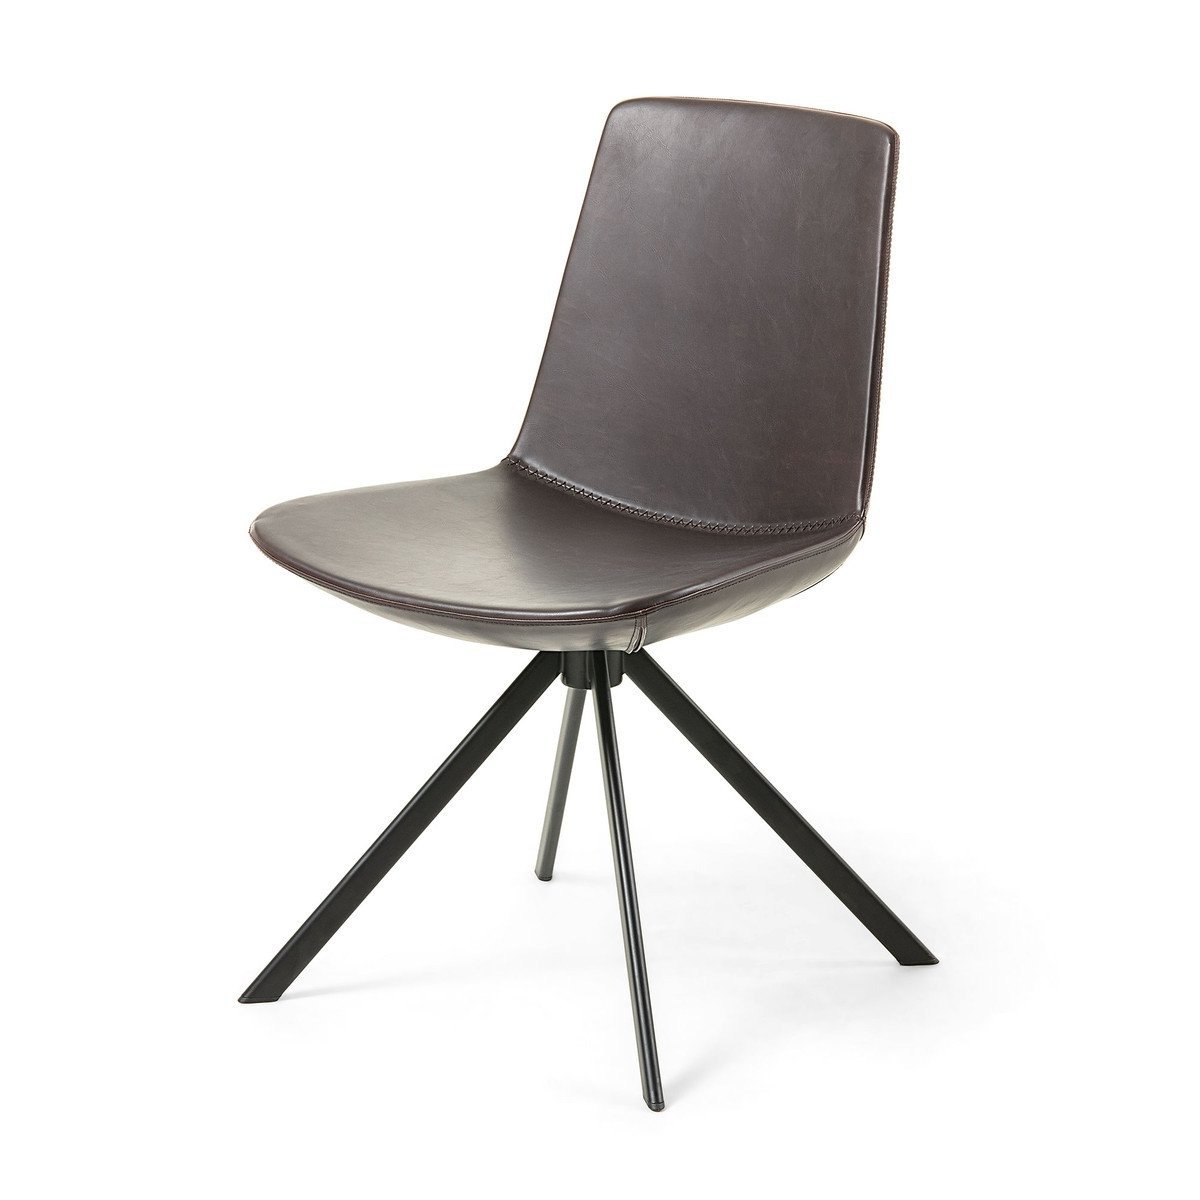 Amelia Leather Dining Chair - Dark Brown - Dining Chairs